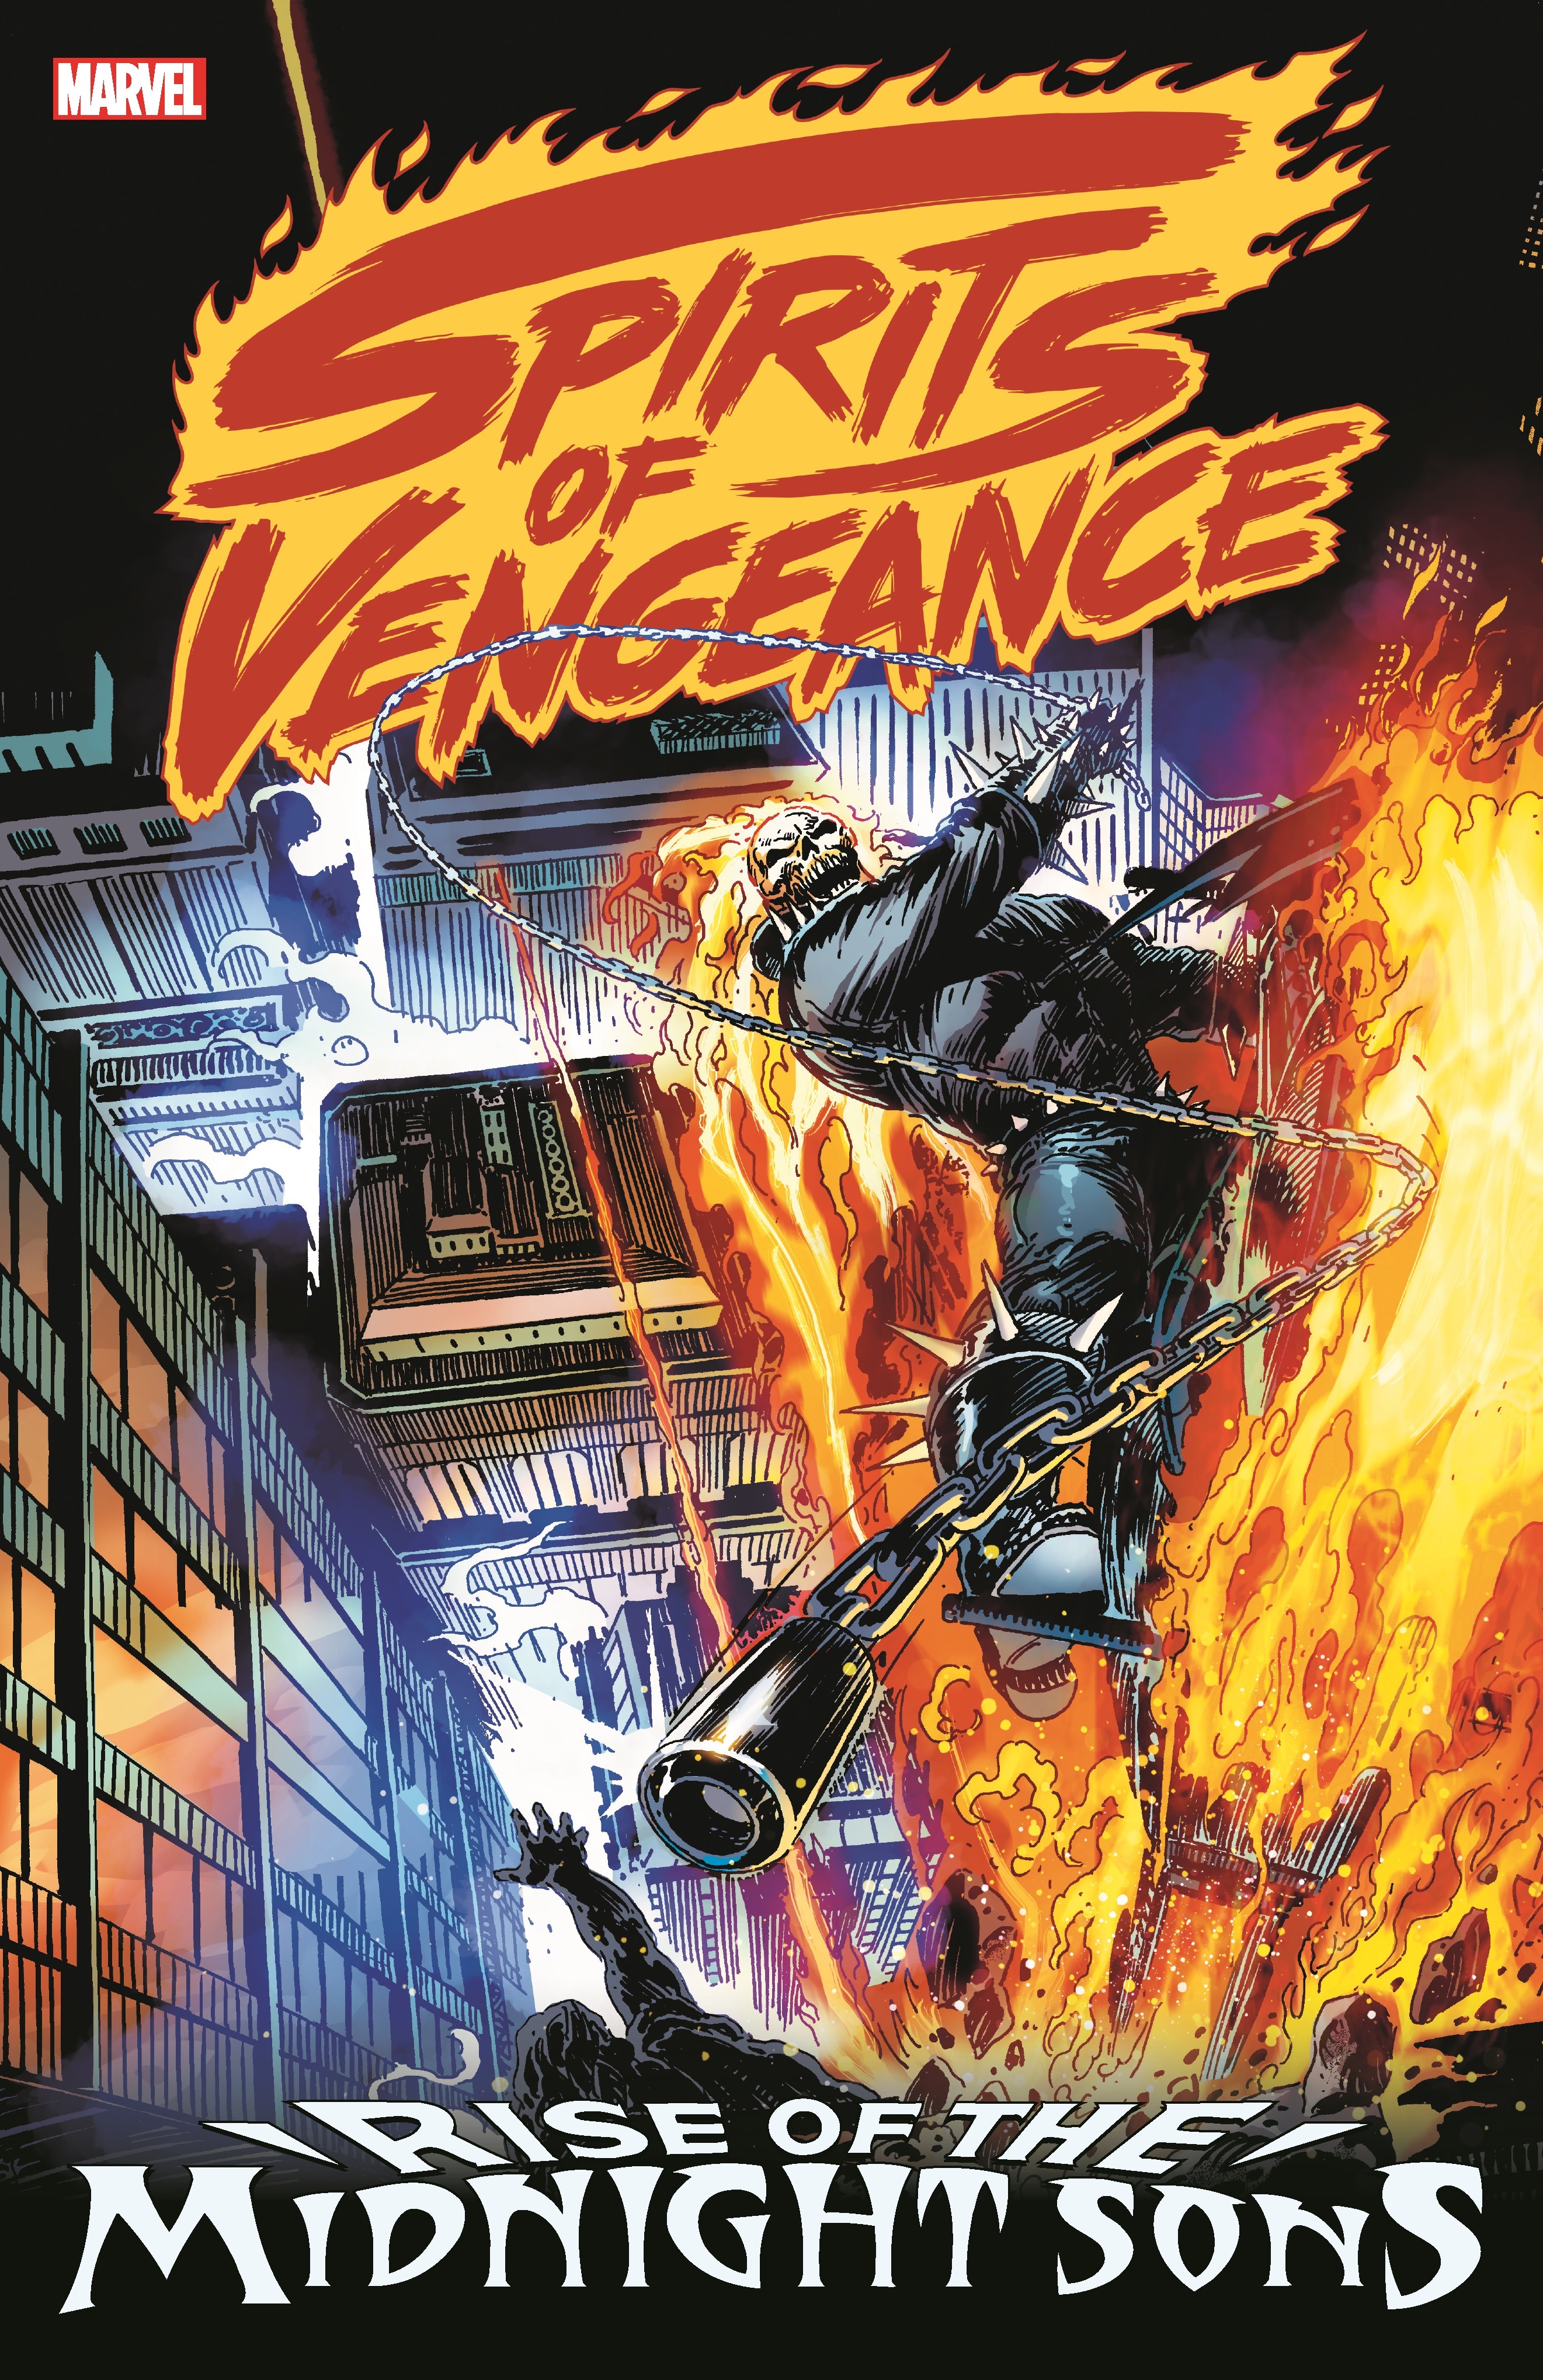 Spirits of Vengeance: Rise of The Midnight Sons (Trade Paperback)